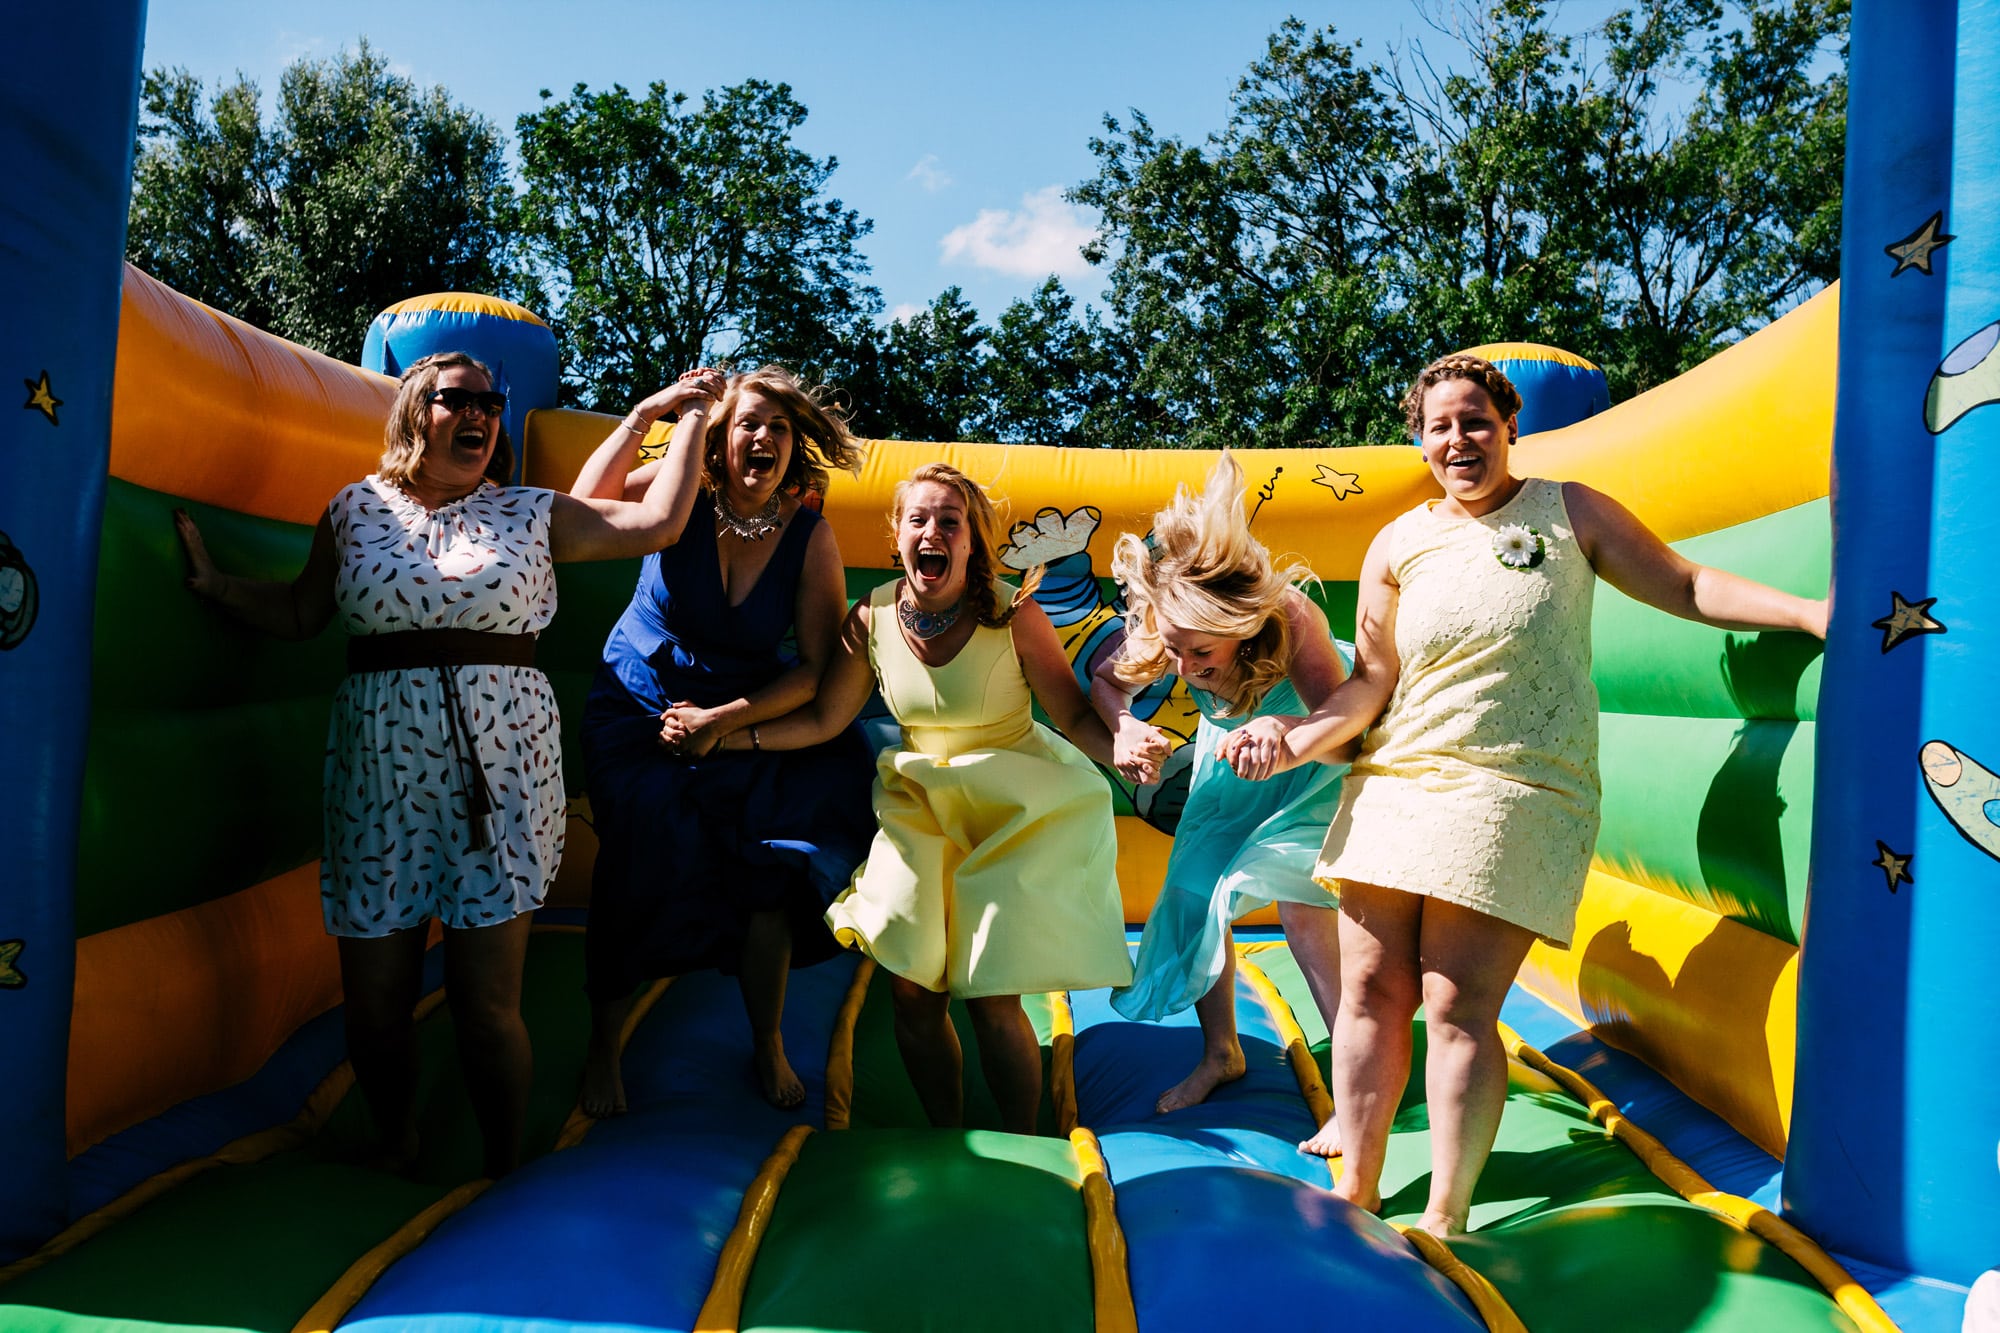 A group of casually chic women pose on a bouncy castle.